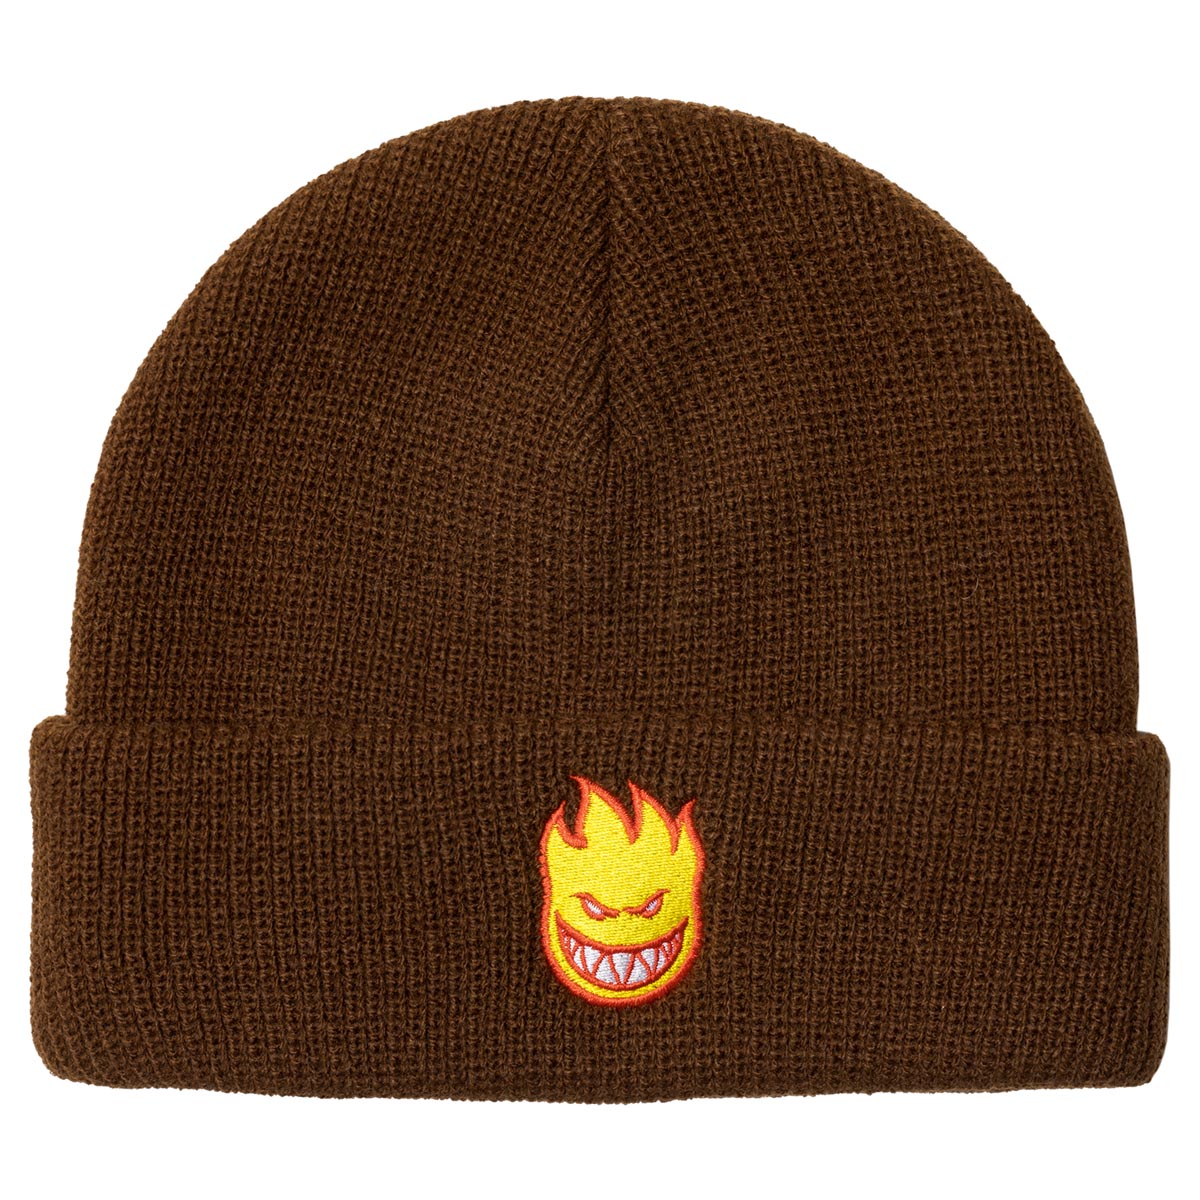 Spitfire Bighead Fill Beanie - Brown/Red/Gold image 1